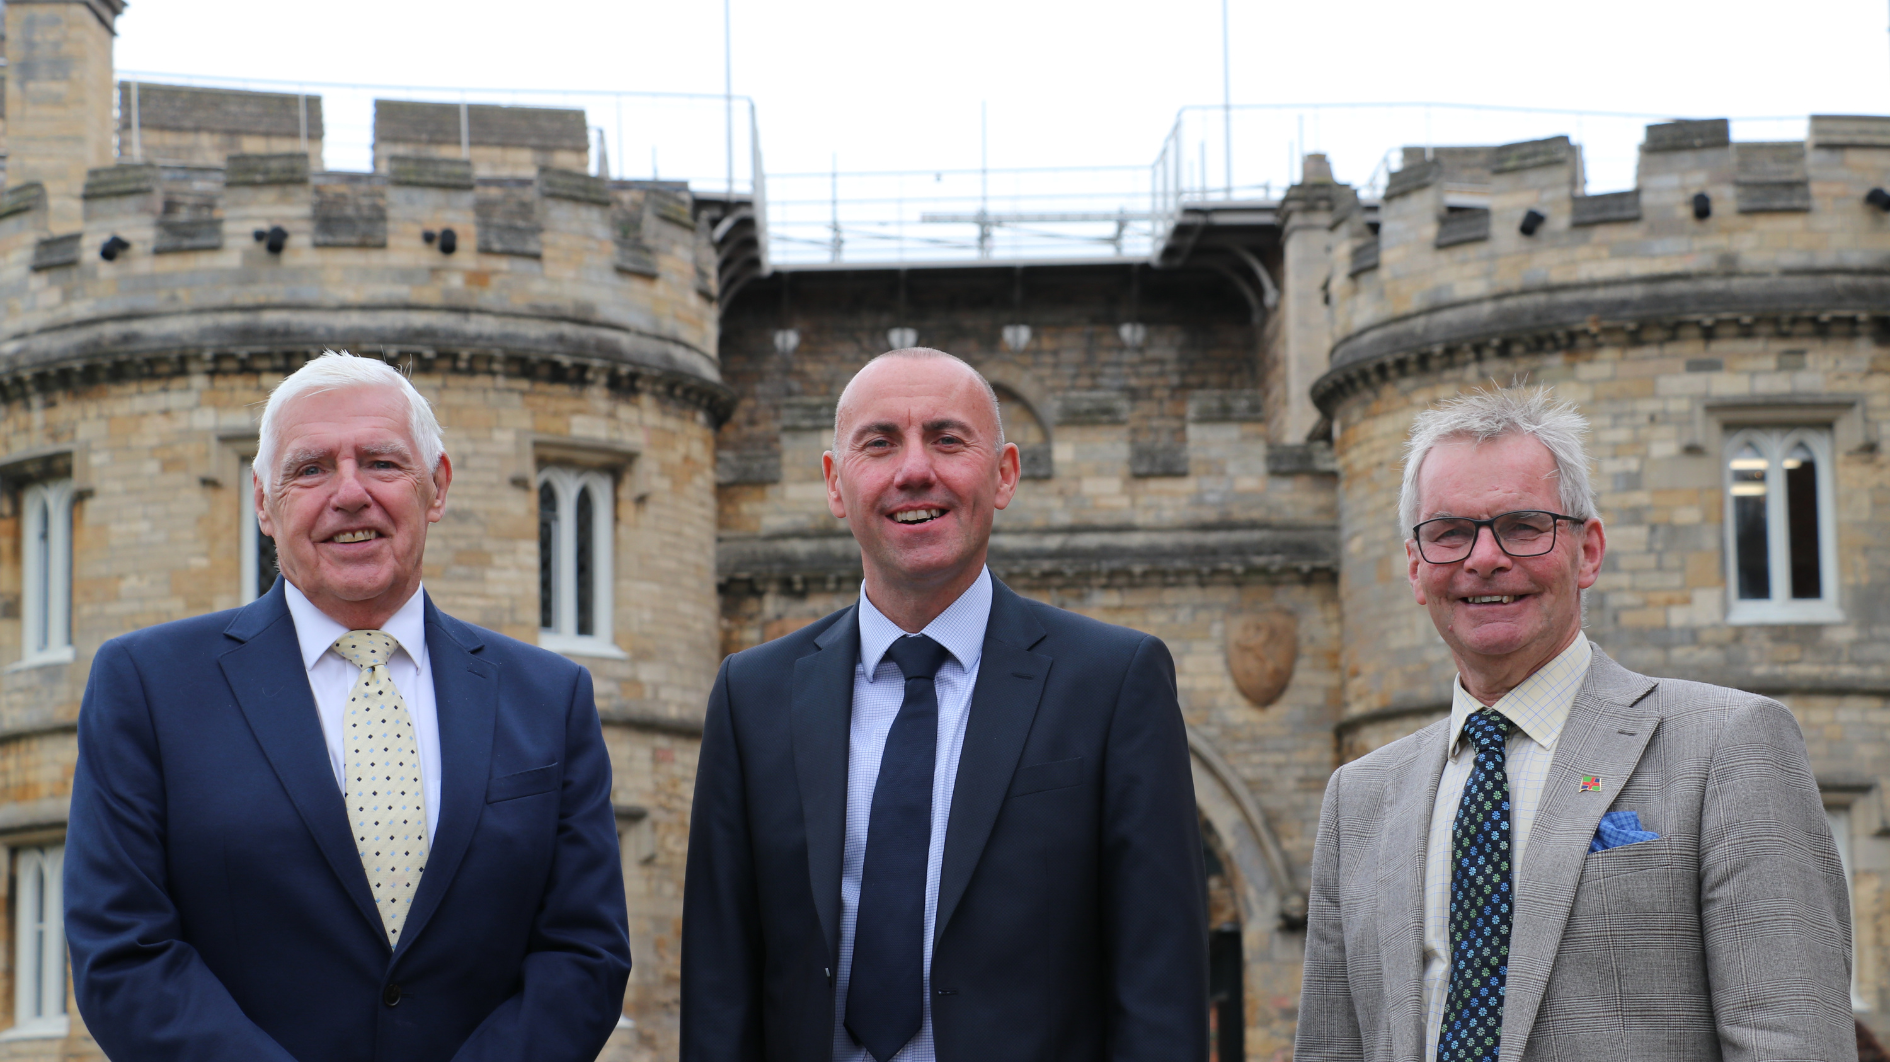 Council leaders at Lincoln Castle gate